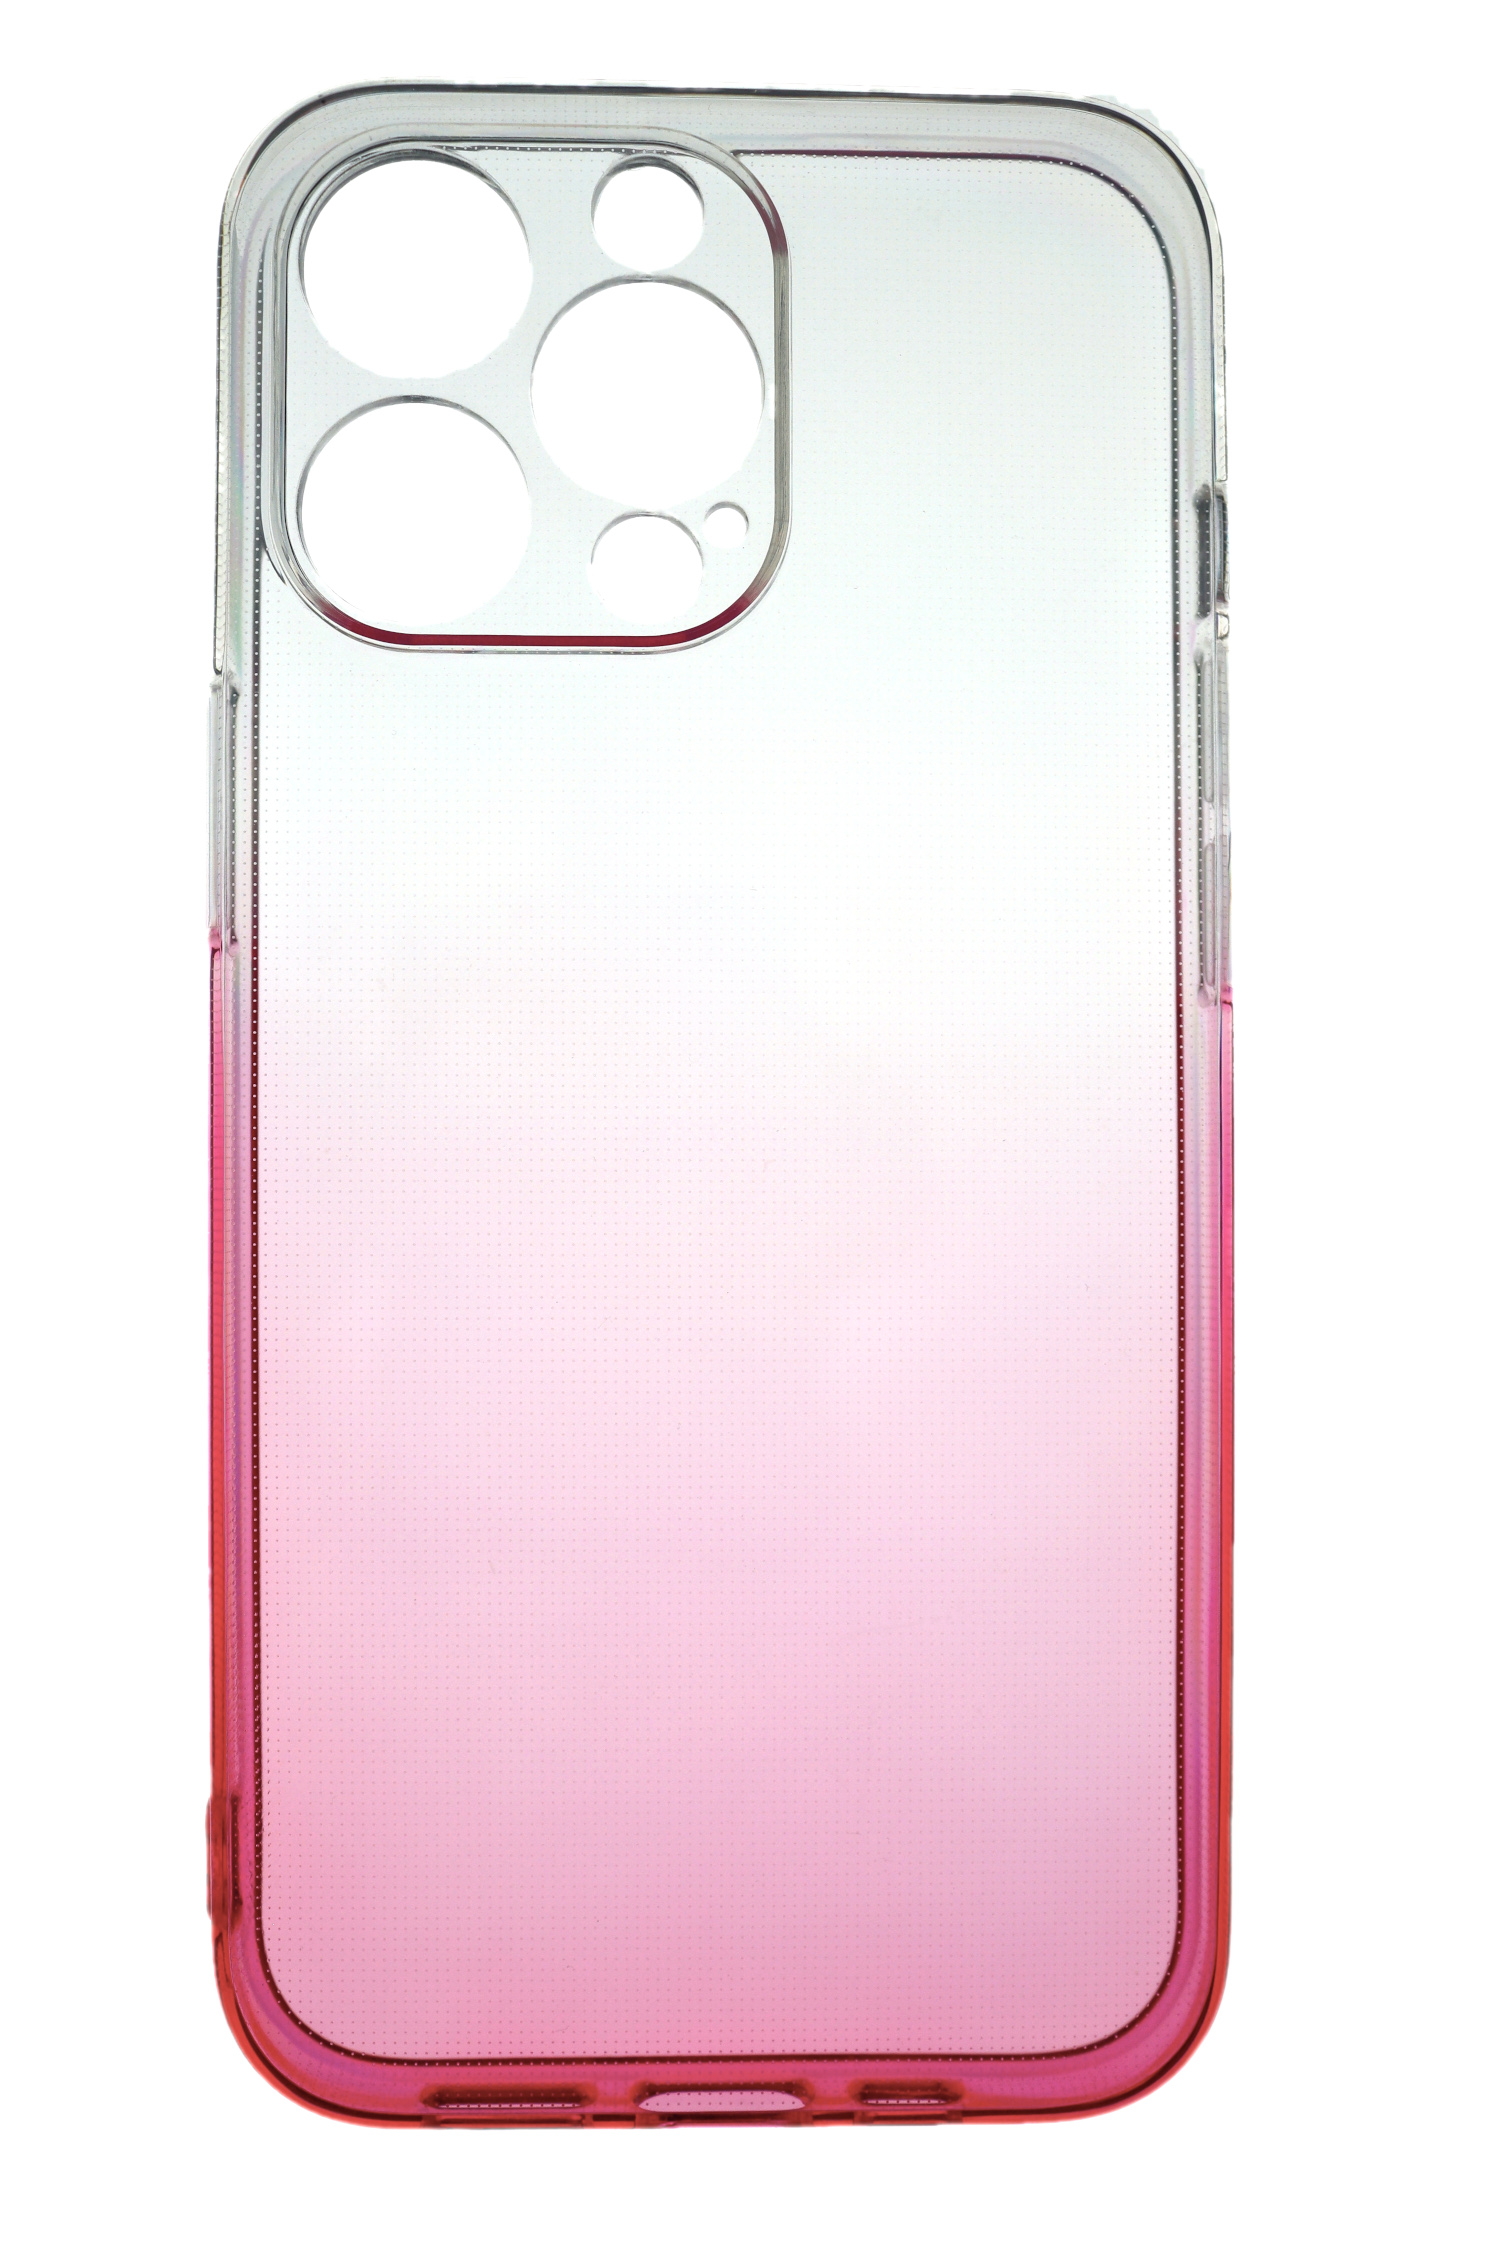 mm JAMCOVER Transparent iPhone Case Apple, Pro, 13 TPU Pink, Strong, 2.0 Backcover,